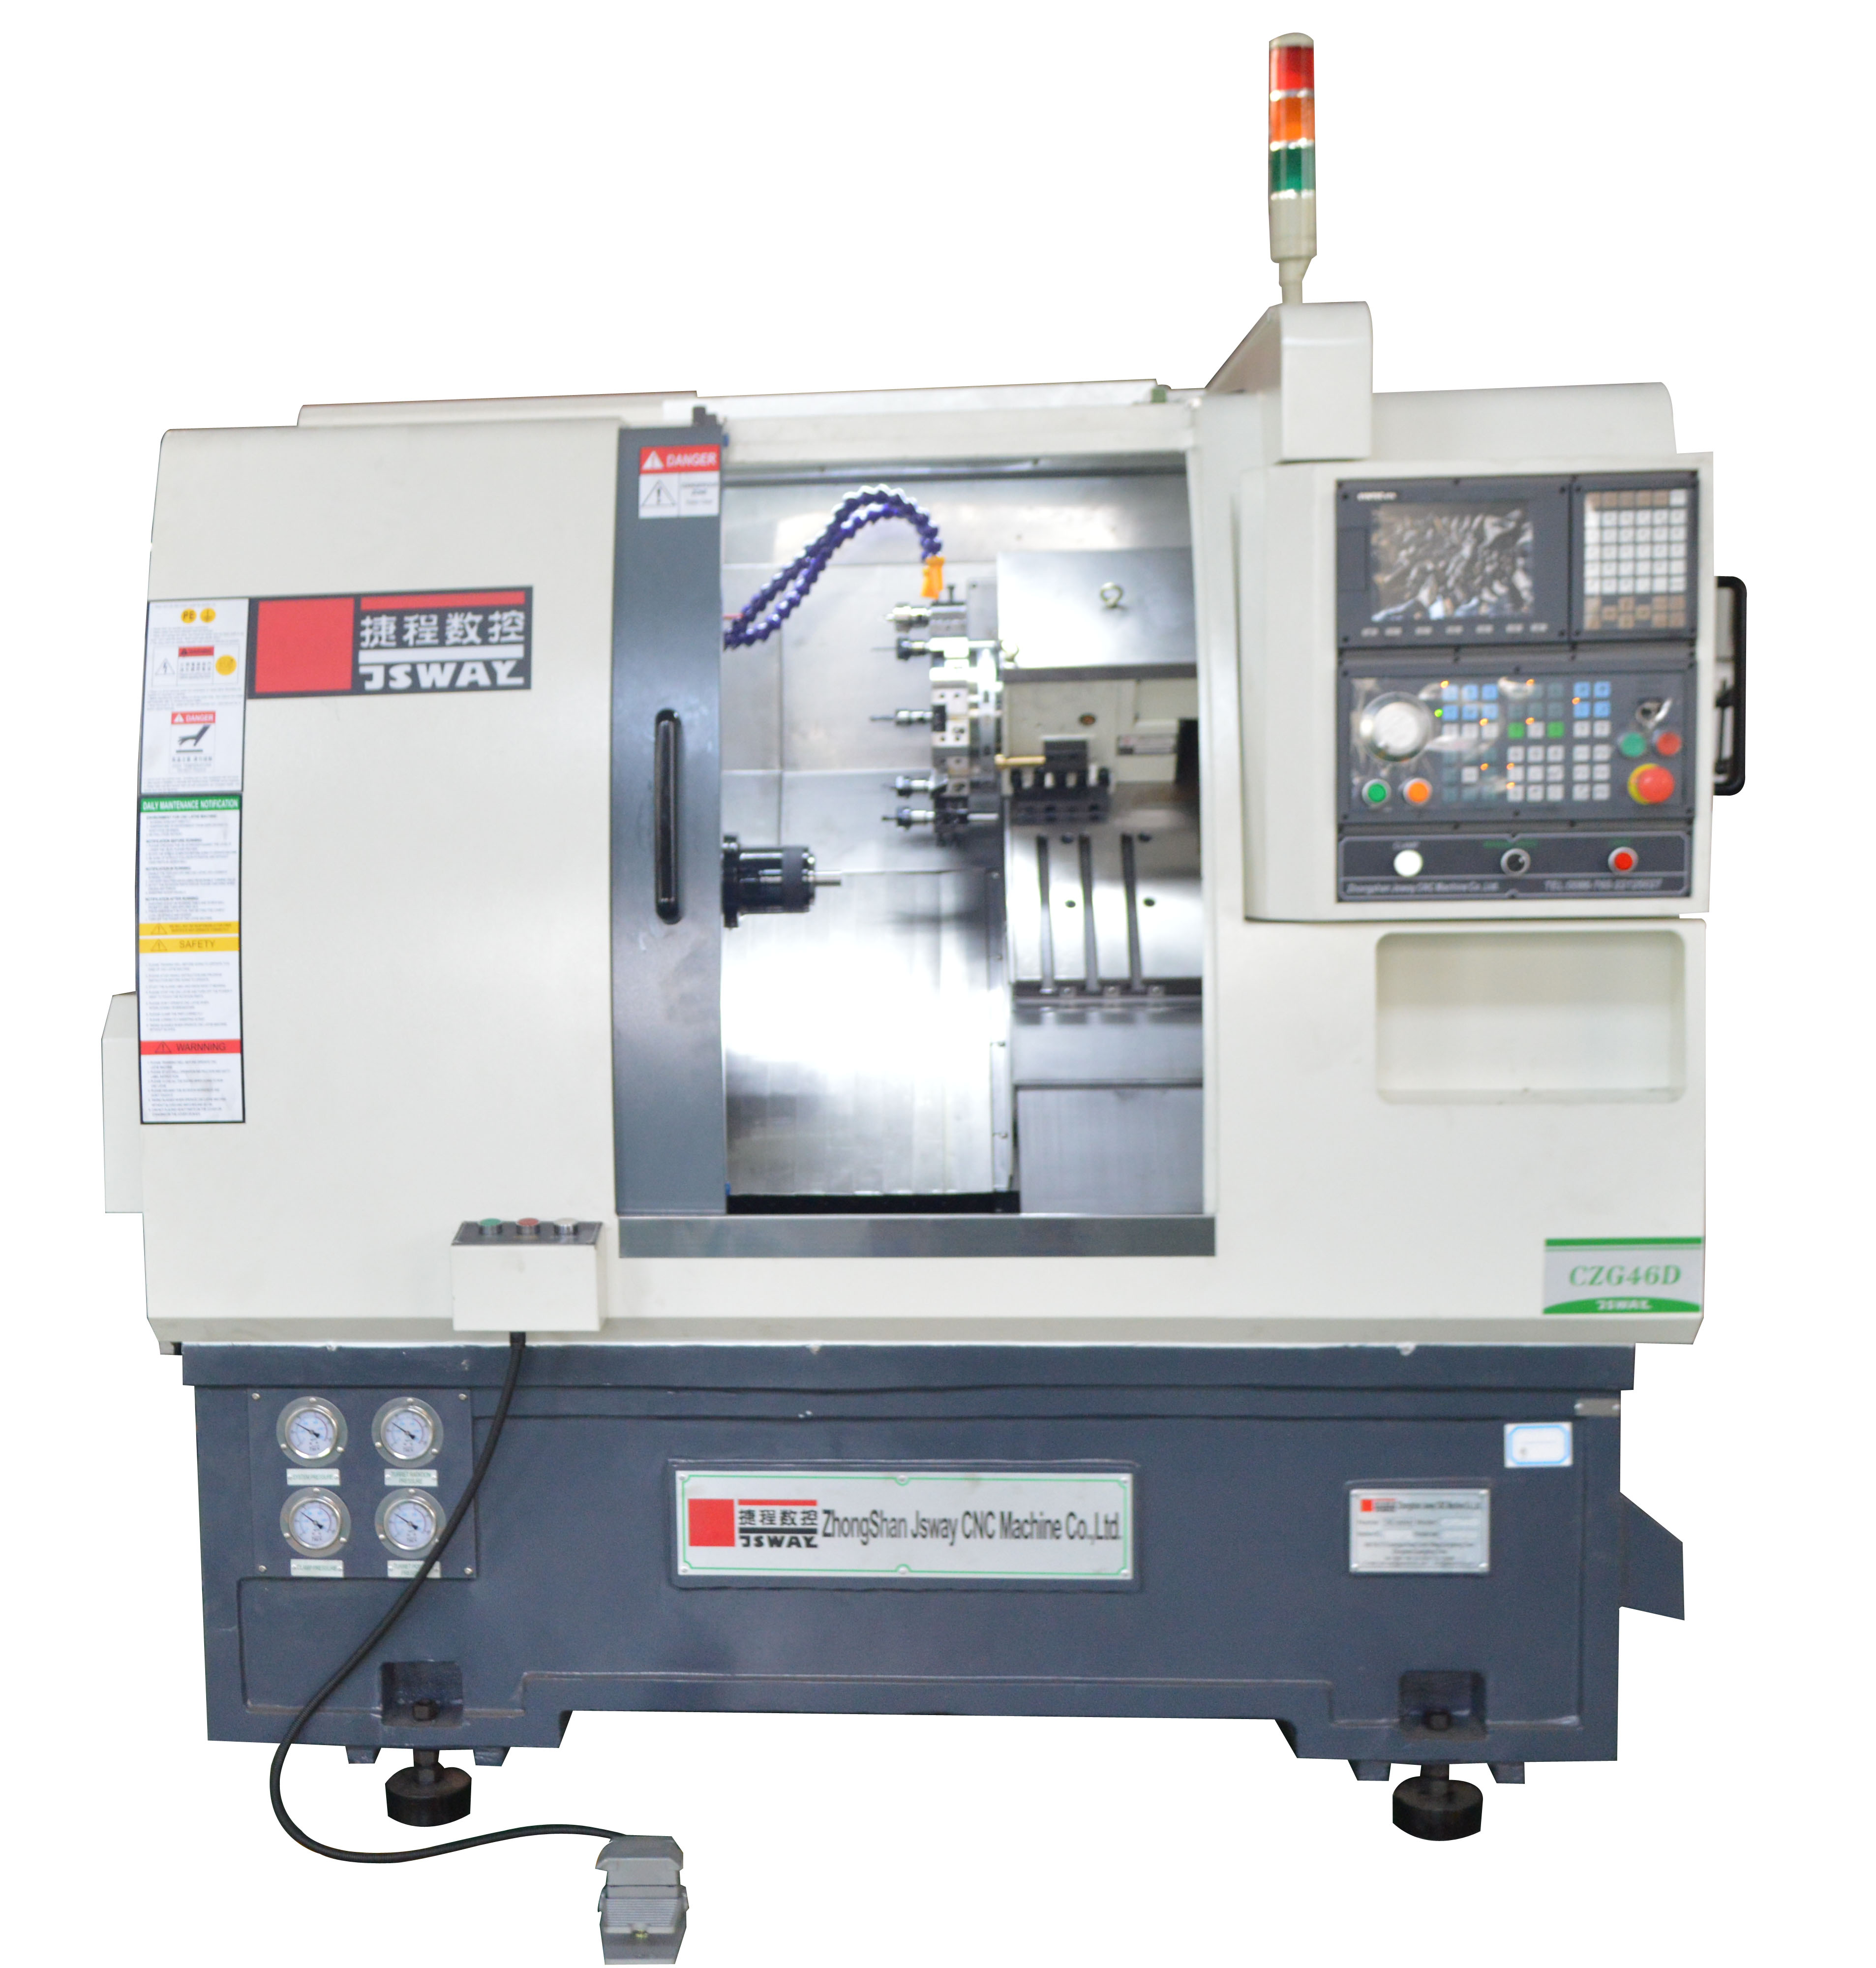 JSWAY cutting cnc milling center supplier for workplace